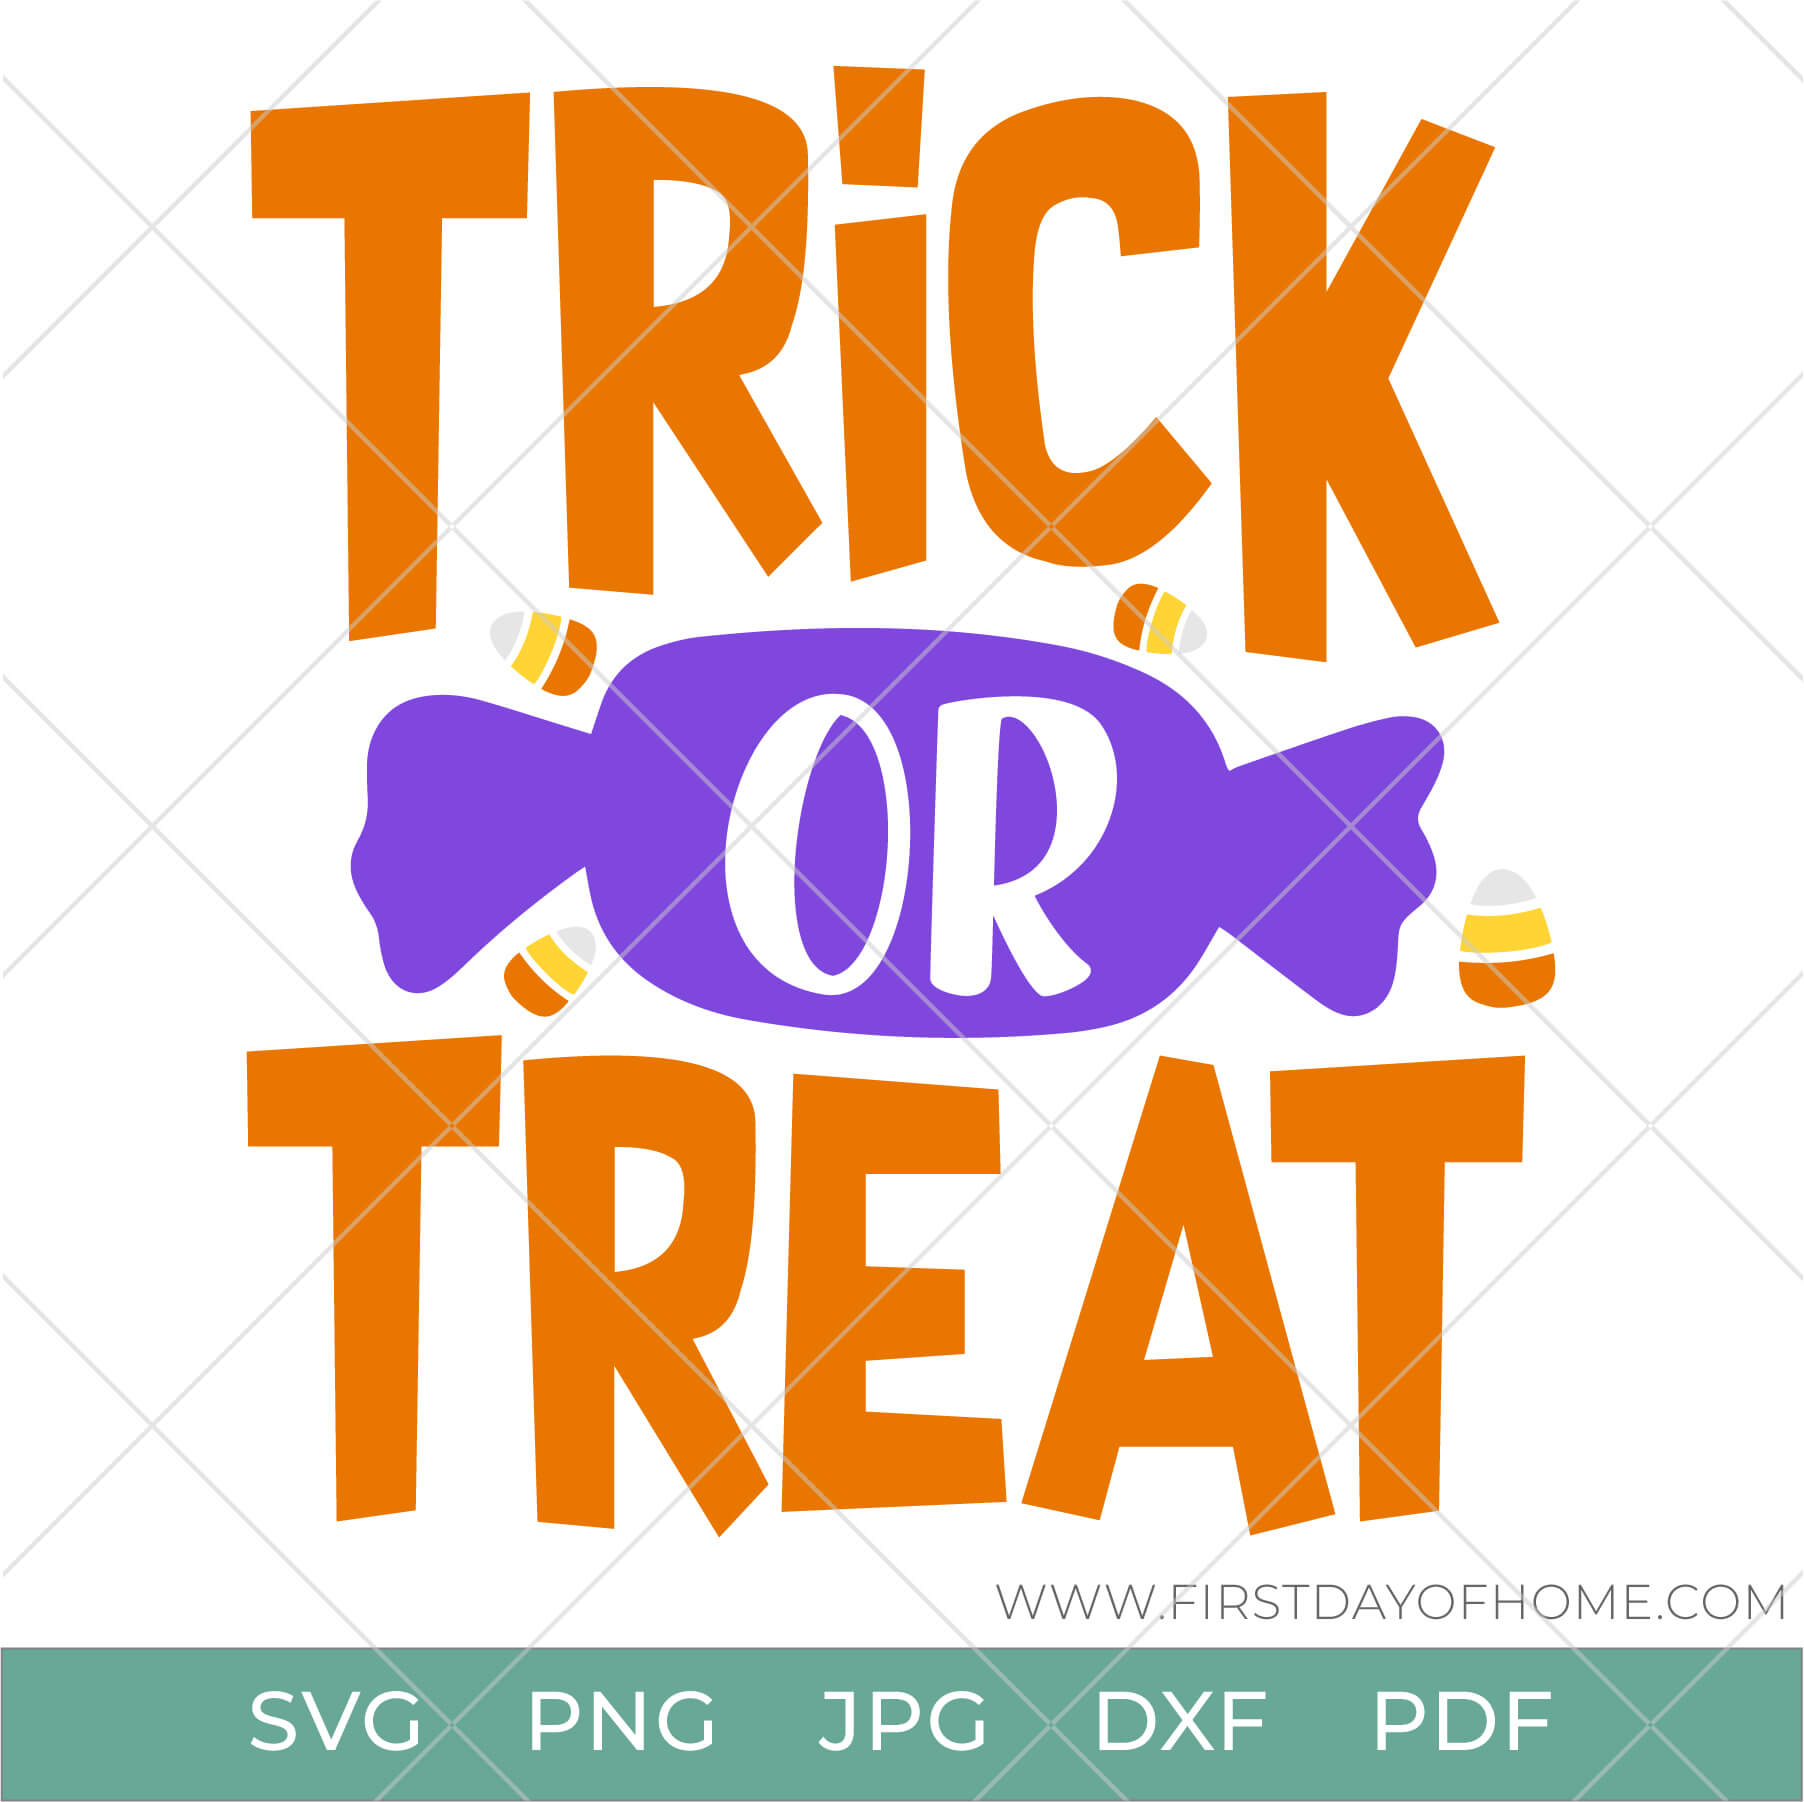 "Trick or Treat" digital design with candy corns, available in SVG, PNG, JPG, DXF and PDF file formats